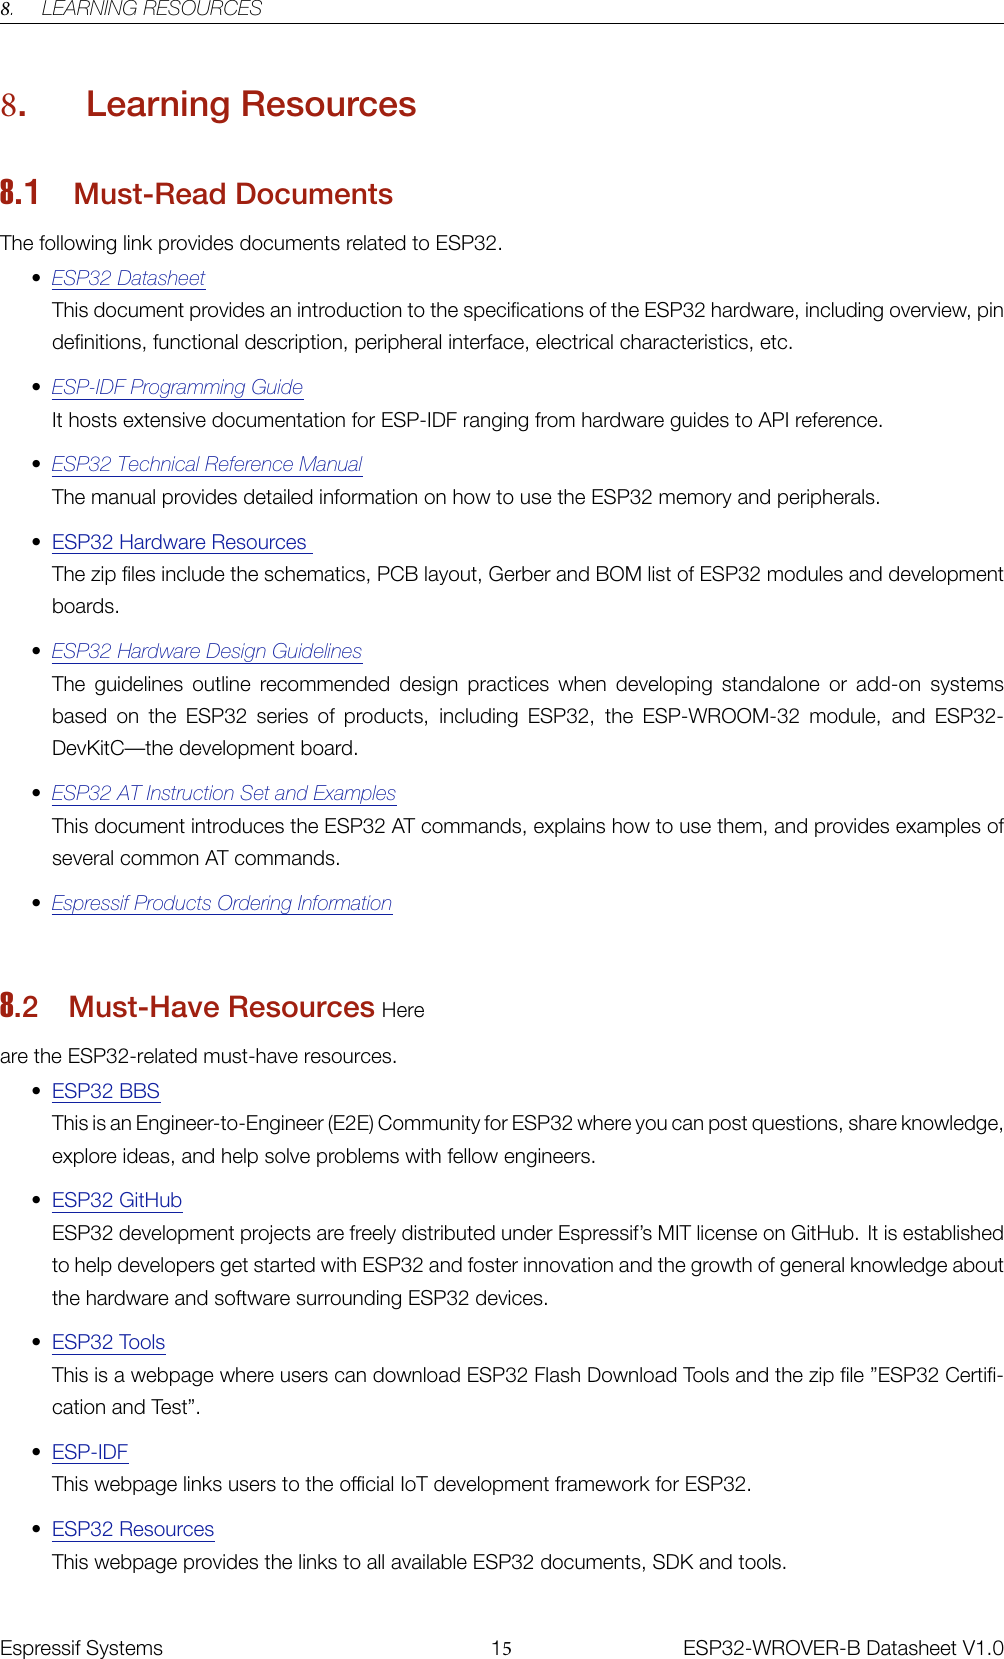 8. LEARNING RESOURCES8. Learning Resources8.1 Must-Read DocumentsThe following link provides documents related to ESP32.•ESP32 DatasheetThis document provides an introduction to the specifications of the ESP32 hardware, including overview, pindefinitions, functional description, peripheral interface, electrical characteristics, etc.•ESP-IDF Programming GuideIt hosts extensive documentation for ESP-IDF ranging from hardware guides to API reference.•ESP32 Technical Reference ManualThe manual provides detailed information on how to use the ESP32 memory and peripherals.•ESP32 Hardware ResourcesThe zip files include the schematics, PCB layout, Gerber and BOM list of ESP32 modules and developmentboards.•ESP32 Hardware Design GuidelinesThe guidelines outline recommended design practices when developing standalone or add-on systemsbased on the ESP32 series of products, including ESP32, the ESP-WROOM-32 module, and ESP32-DevKitC—the development board.•ESP32 AT Instruction Set and ExamplesThis document introduces the ESP32 AT commands, explains how to use them, and provides examples ofseveral common AT commands.•Espressif Products Ordering Information8.2 Must-Have Resources Here are the ESP32-related must-have resources.•ESP32 BBSThis is an Engineer-to-Engineer (E2E) Community for ESP32 where you can post questions, share knowledge,explore ideas, and help solve problems with fellow engineers.•ESP32 GitHubESP32 development projects are freely distributed under Espressif’s MIT license on GitHub. It is establishedto help developers get started with ESP32 and foster innovation and the growth of general knowledge aboutthe hardware and software surrounding ESP32 devices.•ESP32 ToolsThis is a webpage where users can download ESP32 Flash Download Tools and the zip file ”ESP32 Certifi-cation and Test”.•ESP-IDFThis webpage links users to the official IoT development framework for ESP32.•ESP32 ResourcesThis webpage provides the links to all available ESP32 documents, SDK and tools. �����������Espressif Systems 15ESP32-WROVER-B Datasheet V1.0